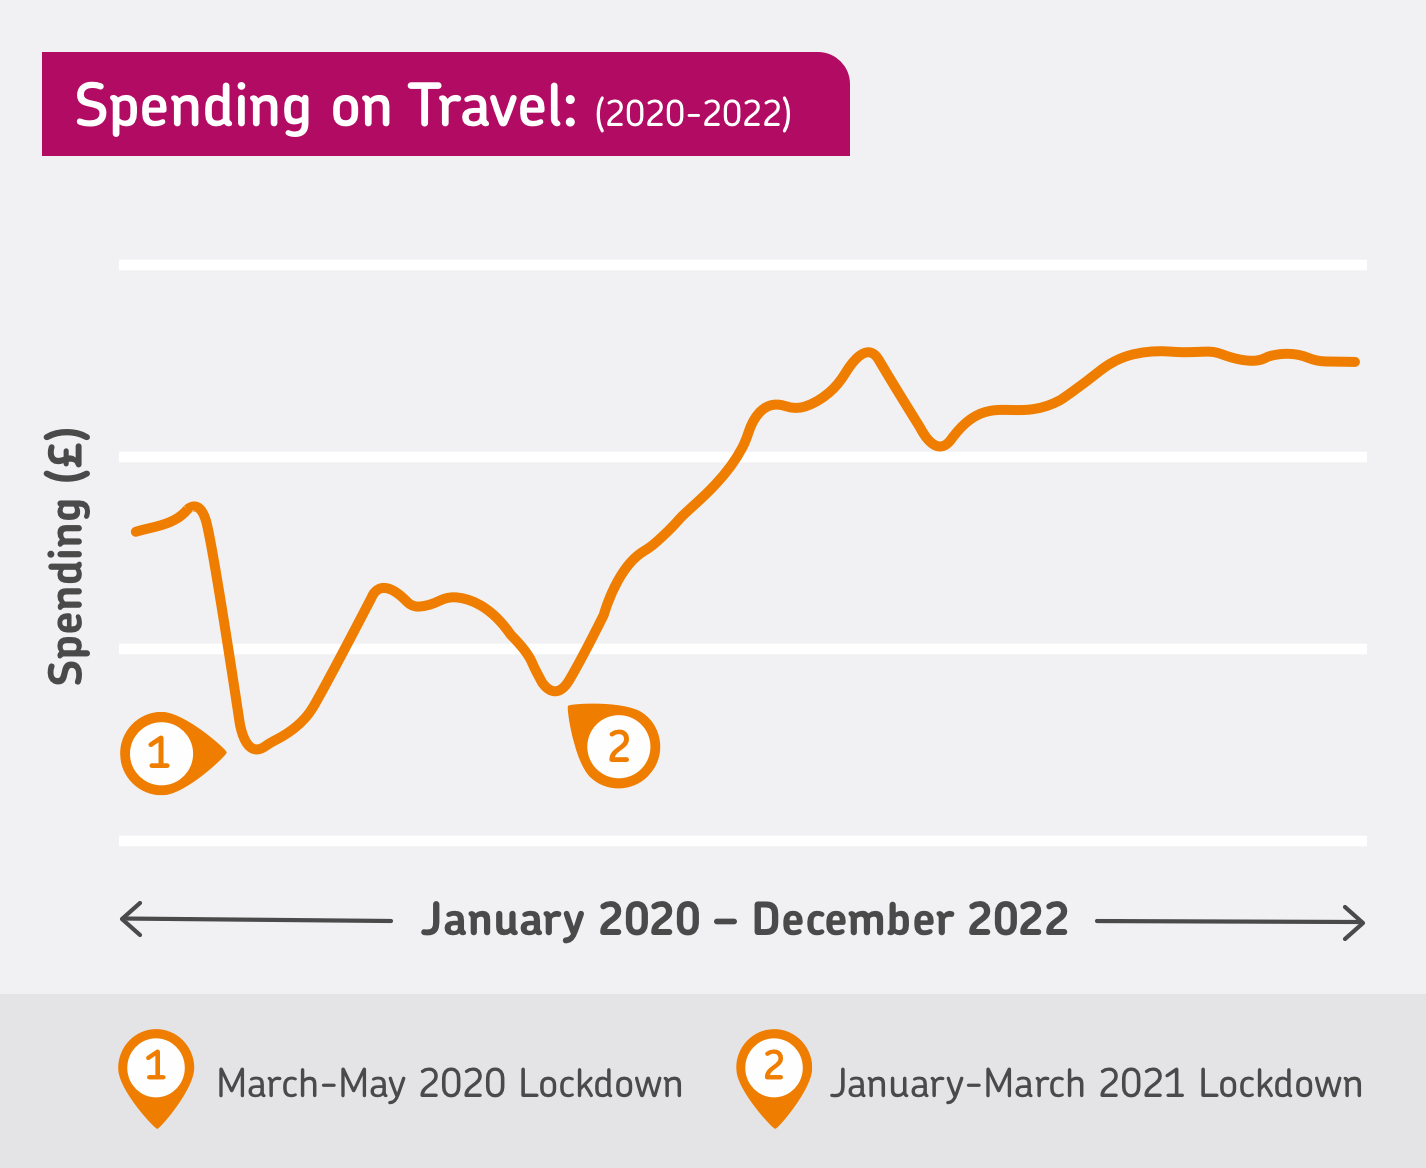 Graph displaying UK consumer spending data in the travel sector from January 2020 to December 2022